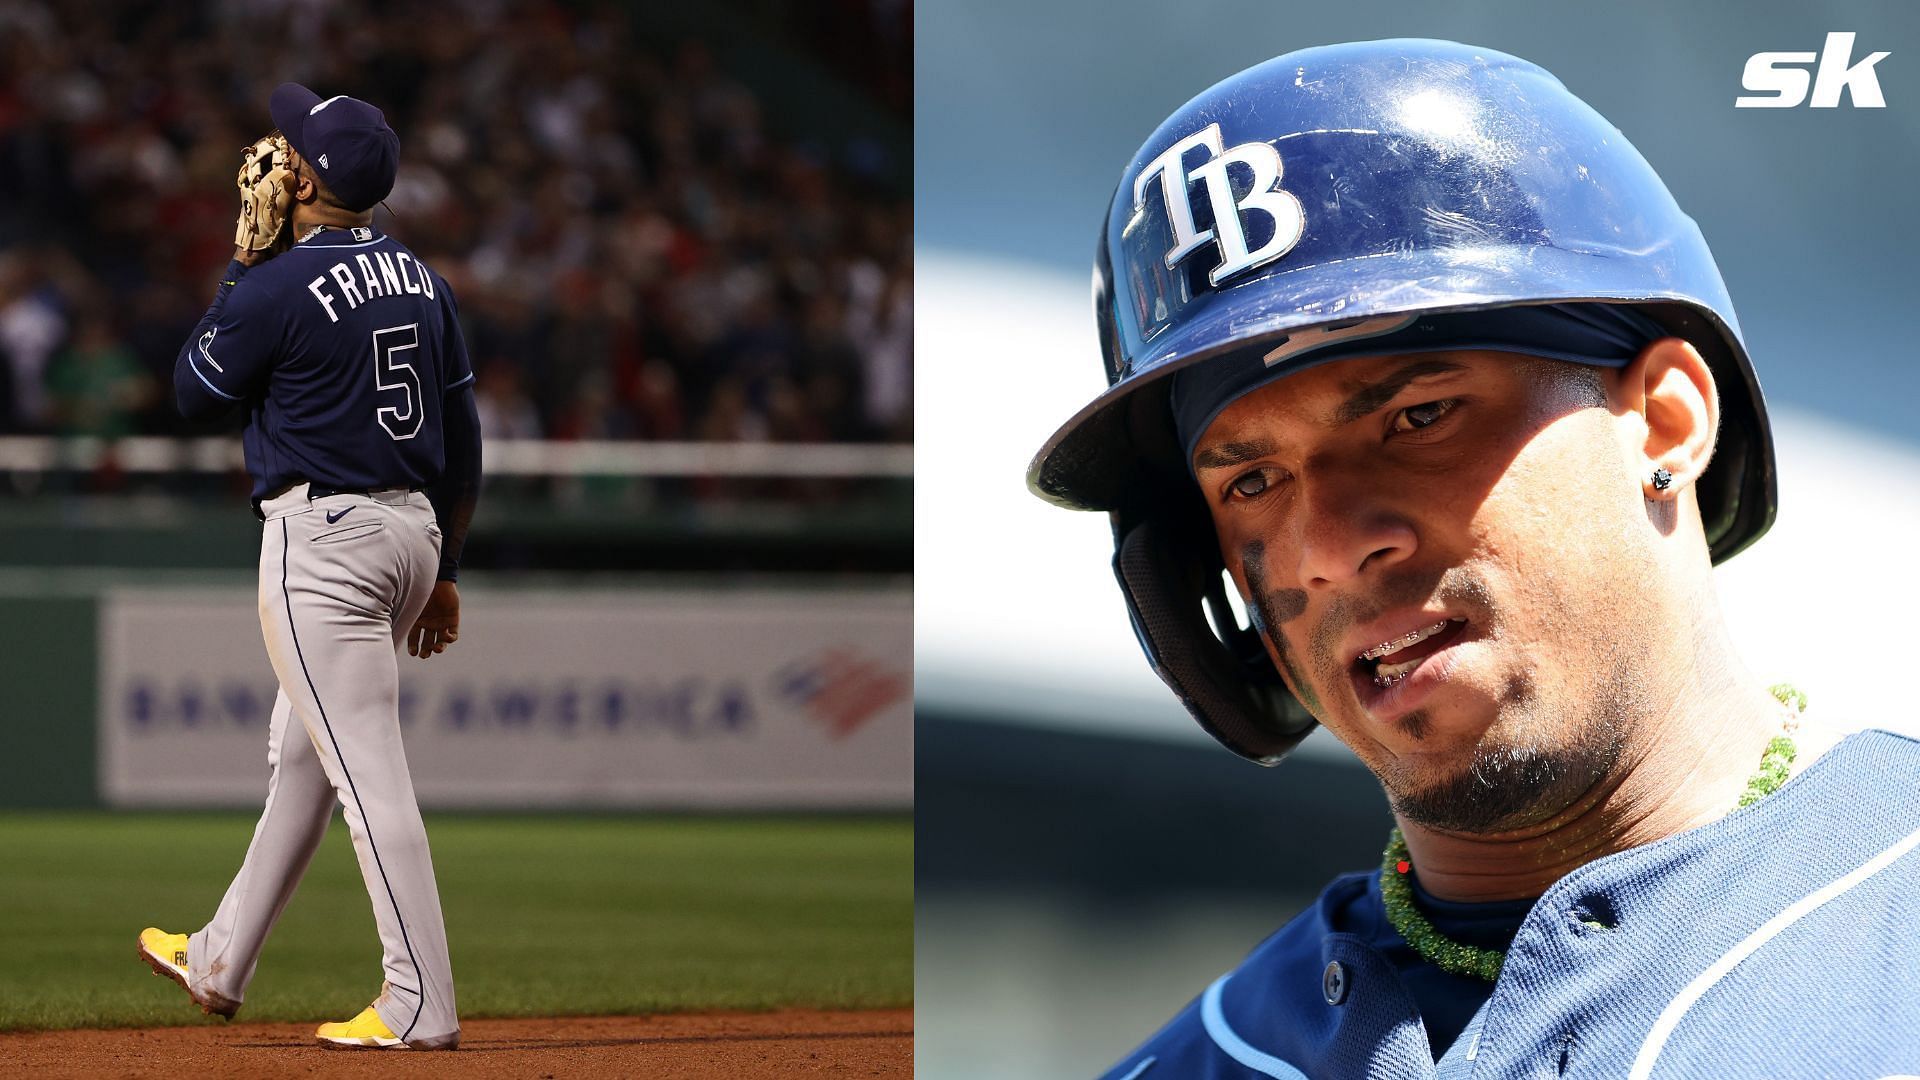 Wander Franco has lost a member of his legal team as the Rays star